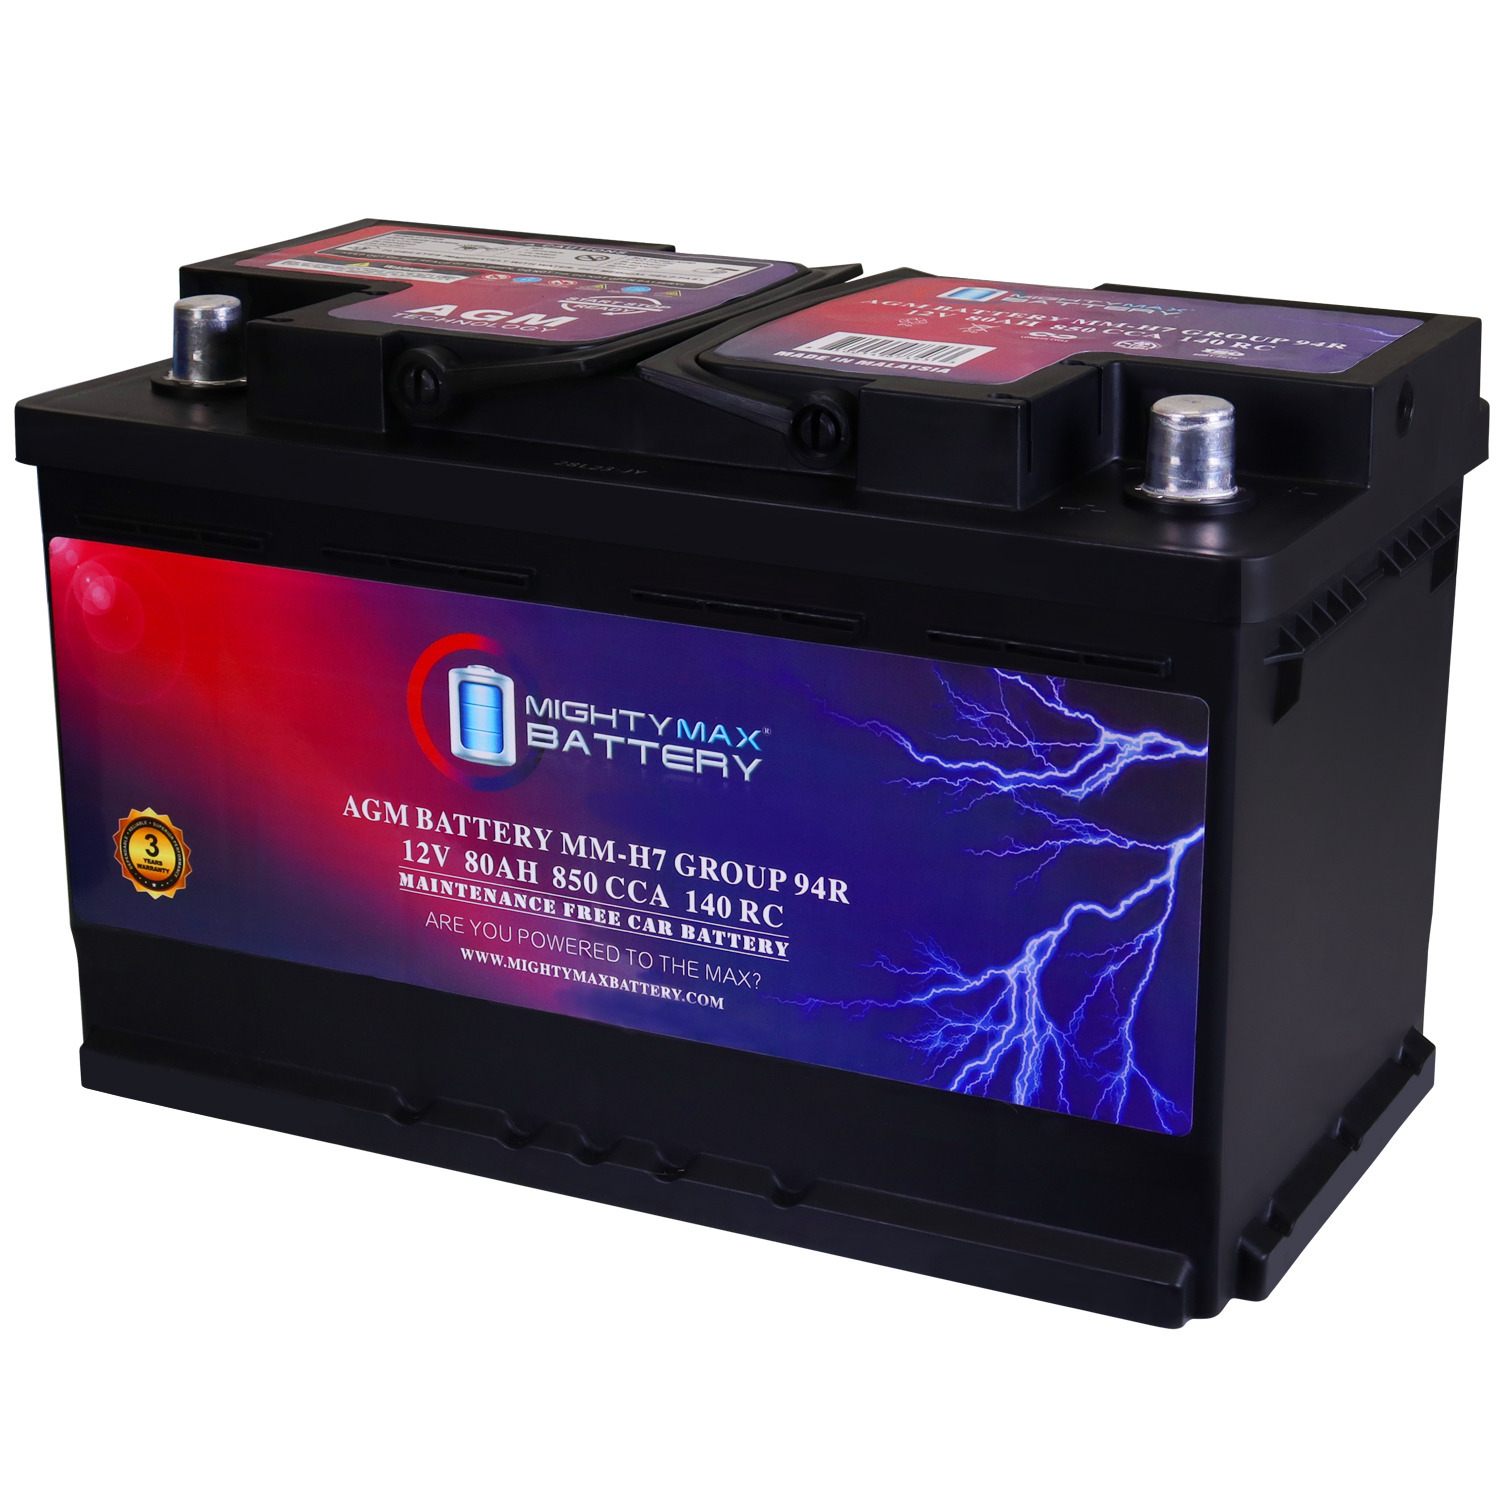 MM-H7 Group 94R 12V 80AH 140RC 850 CCA Replacement Battery Compatible with BMW 328xi 07-08